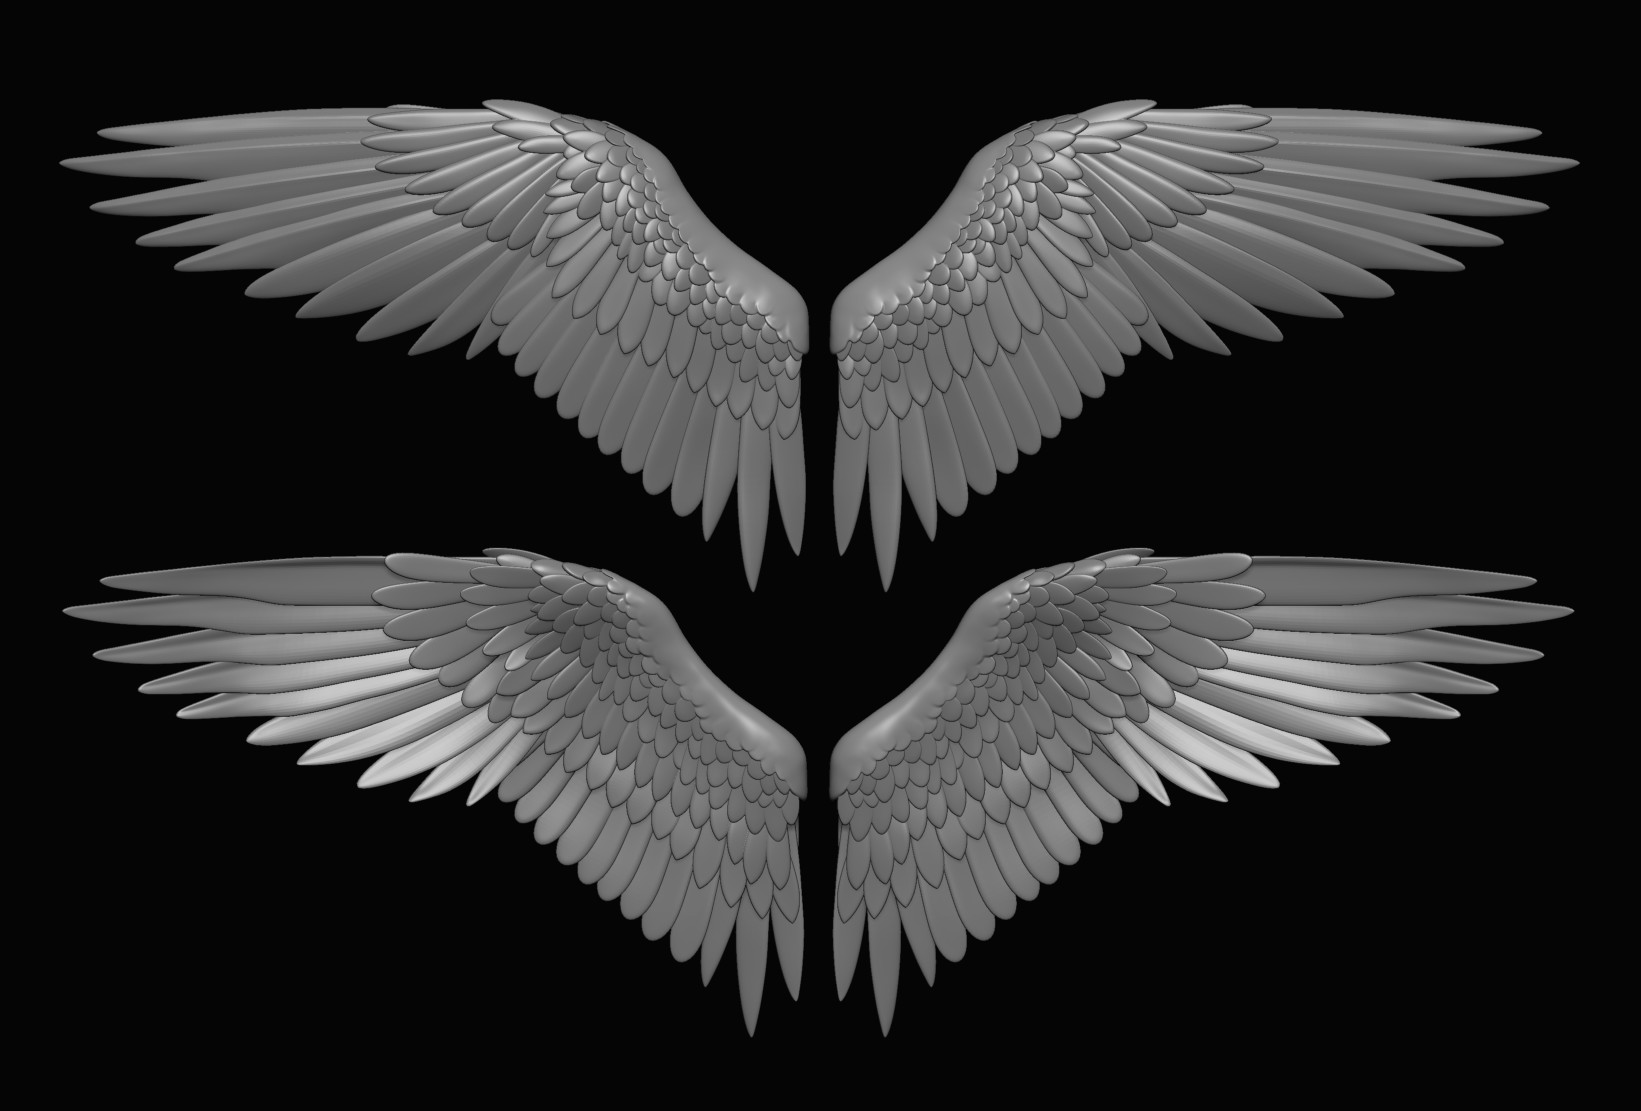 wing alpha zbrush